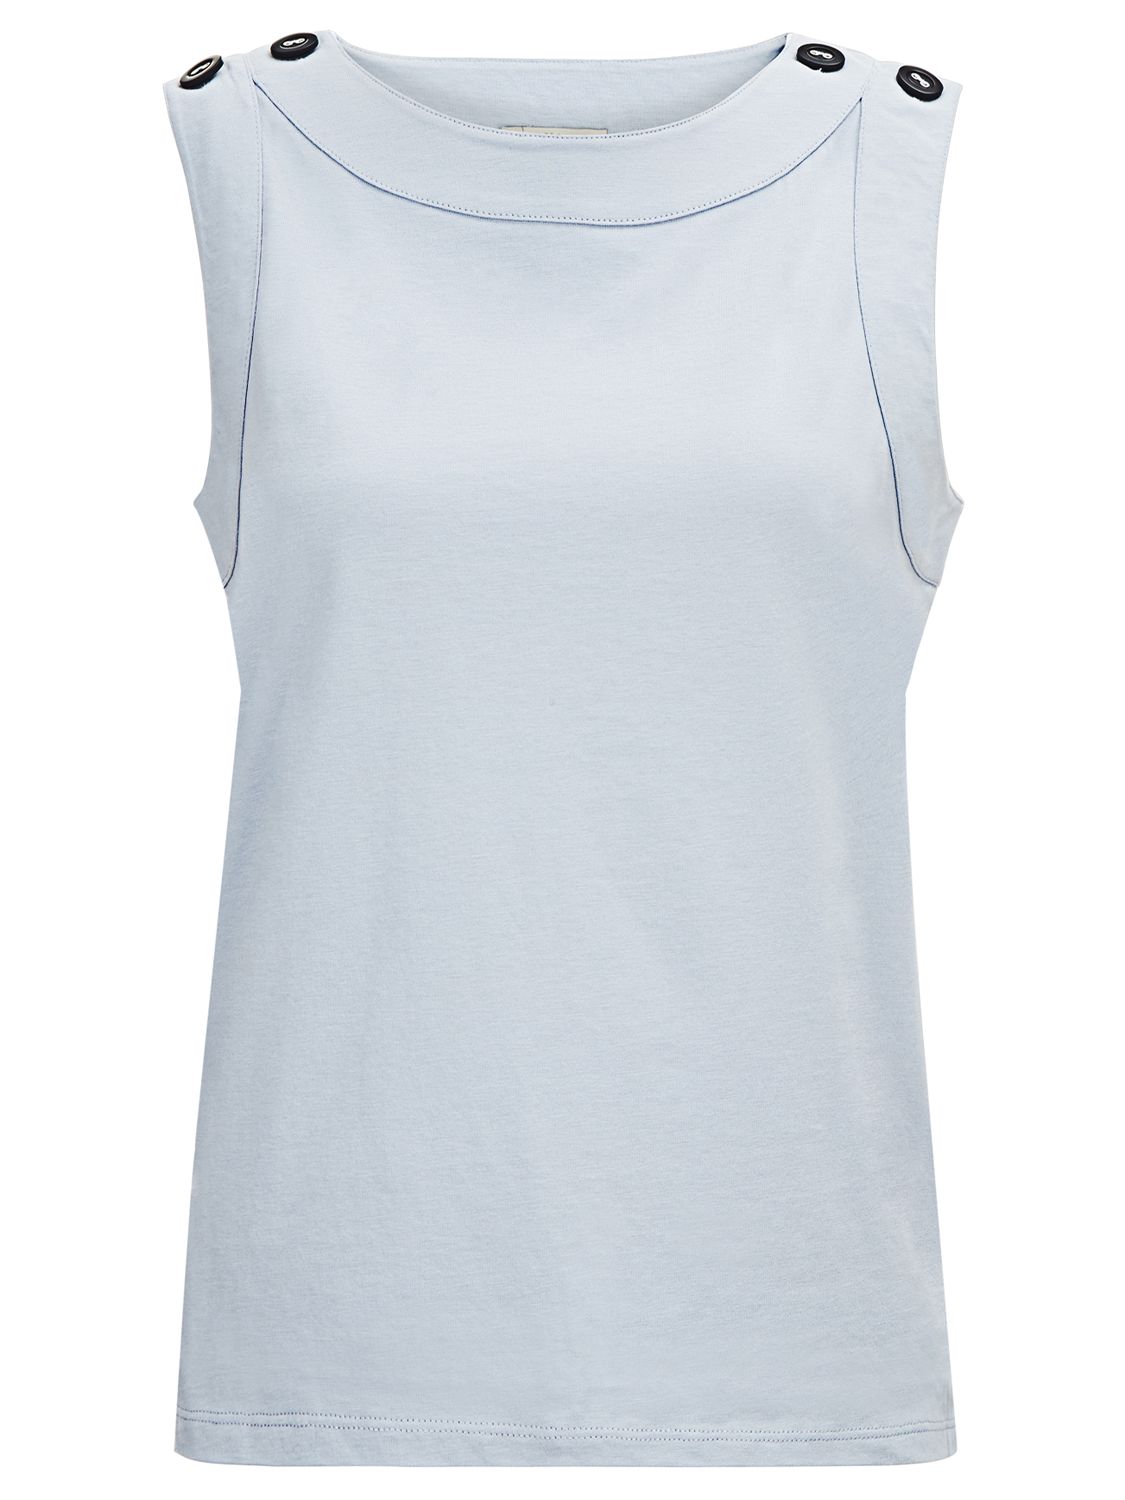 Hobbs Maddy Vest Top at John Lewis & Partners